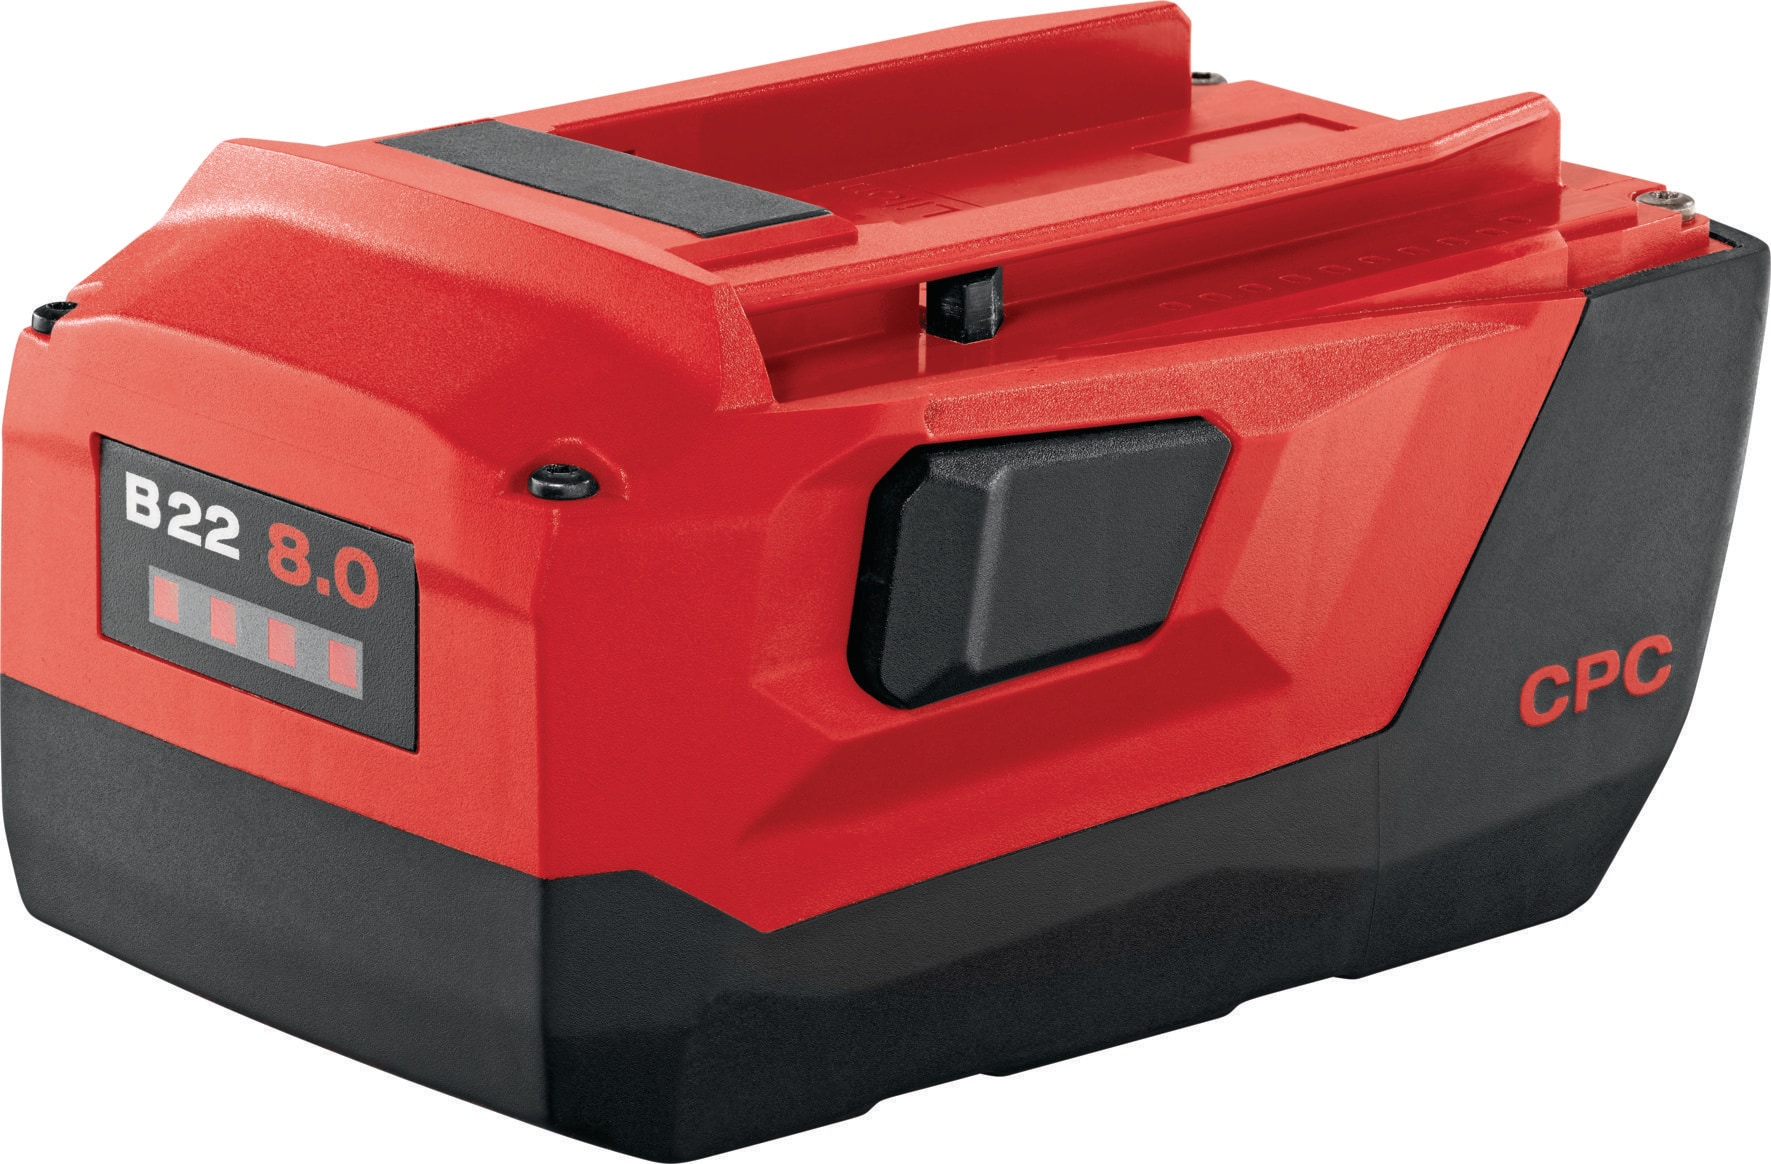 B22 8.0 22V Battery - Batteries for Power Tools - Hilti Canada